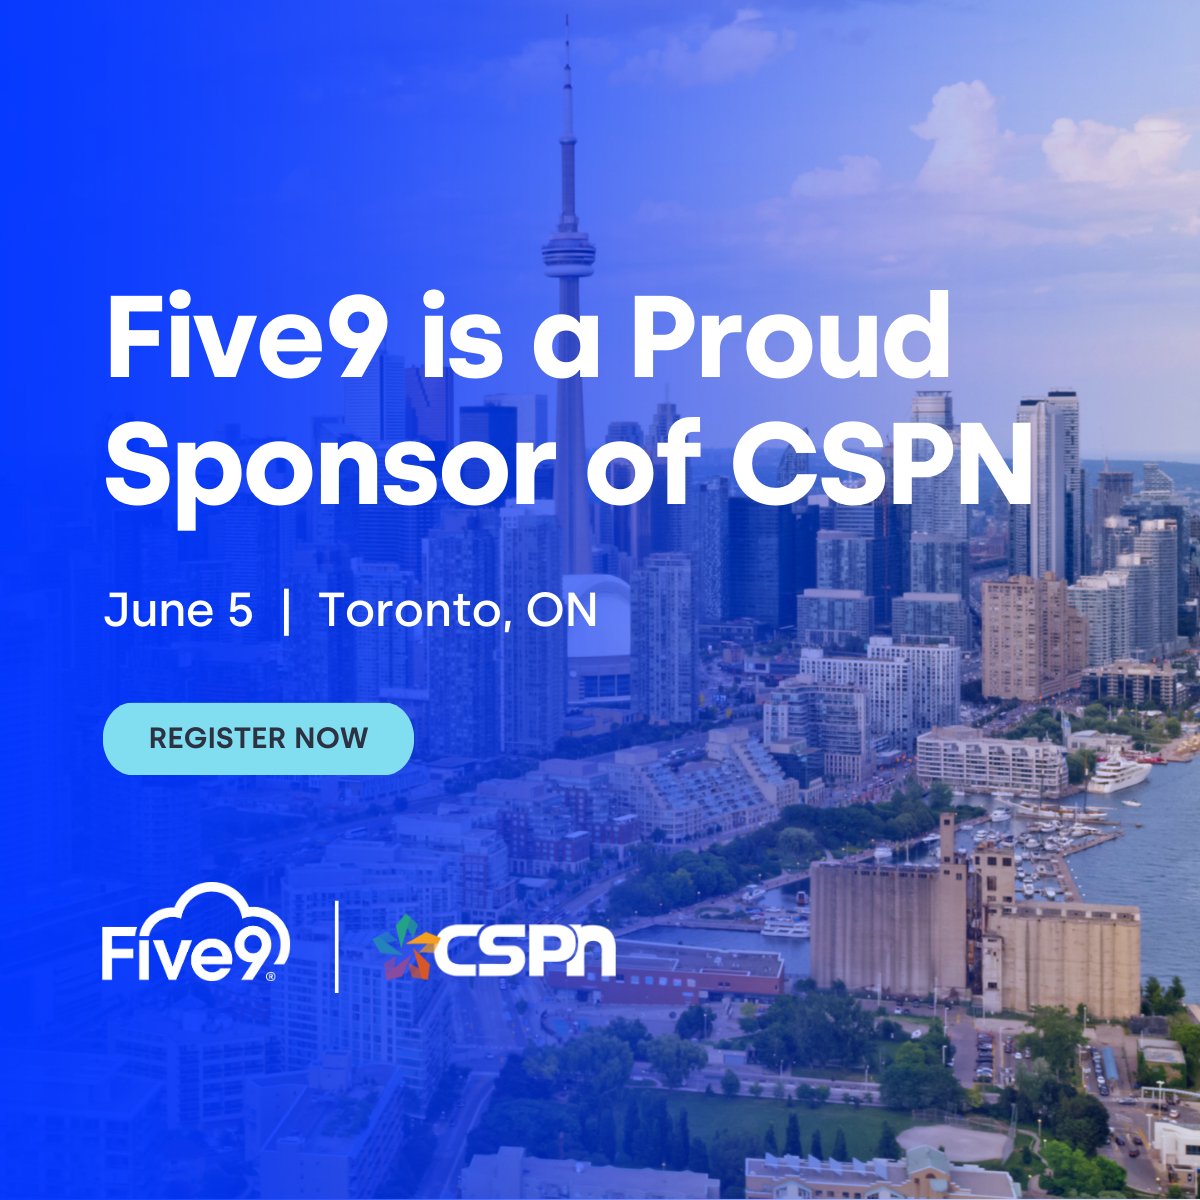 Join us at the CSPN CX Conference in Toronto. 🇨🇦 Get ready for insightful sessions on the intersection of emerging #CX technologies, shifting employee expectations, and evolving customer demands. See you there! @myCSPN #CSPNCXConference #CXConference spr.ly/6013ej05T